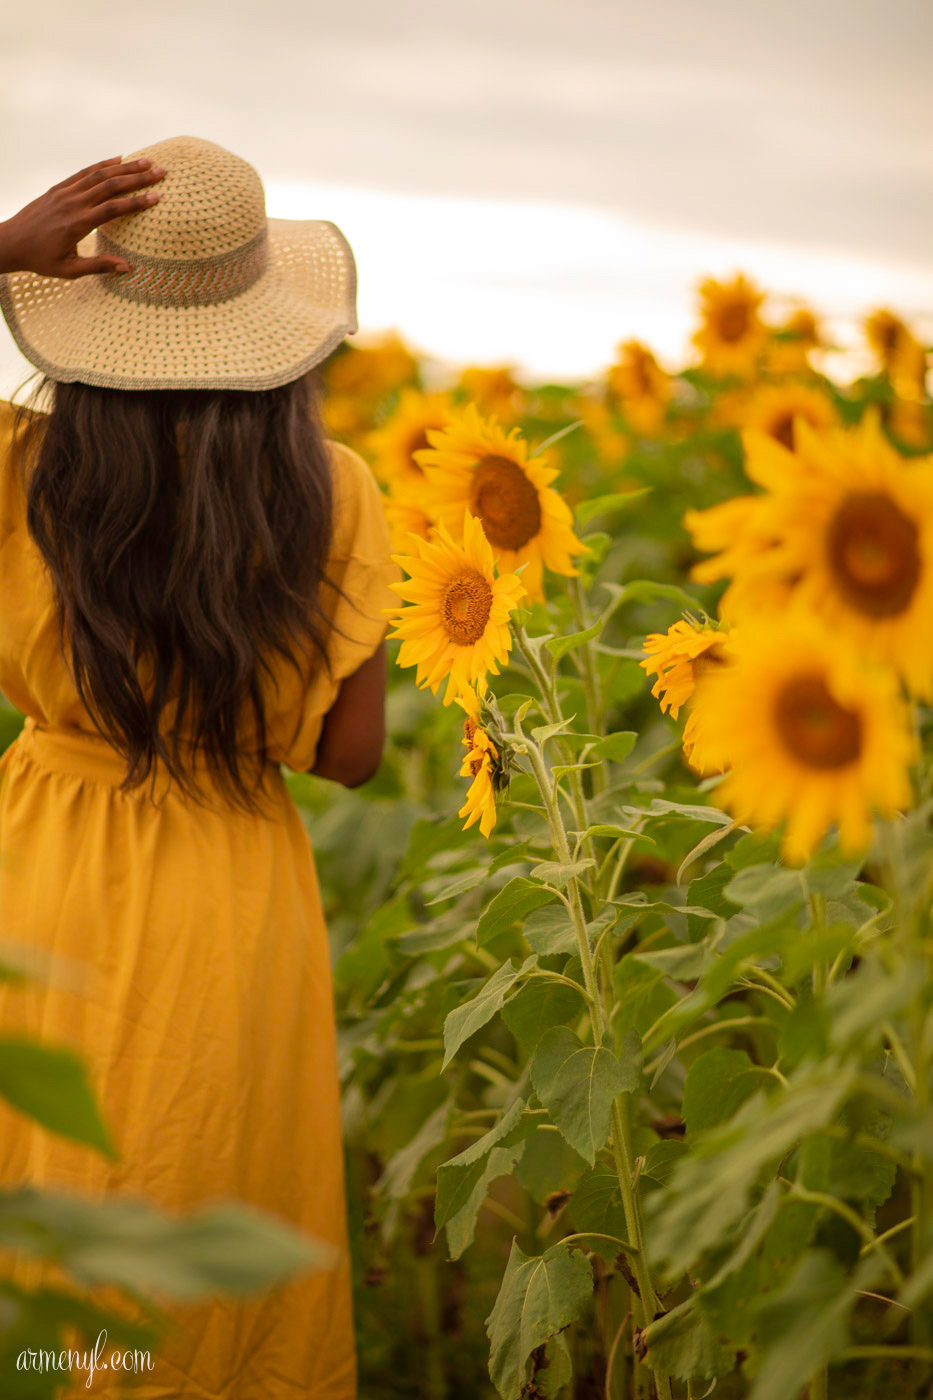 A travel through fashion Self Portrait series by Armenyl featuring the sunflower fields in Jarretsville Maryland.